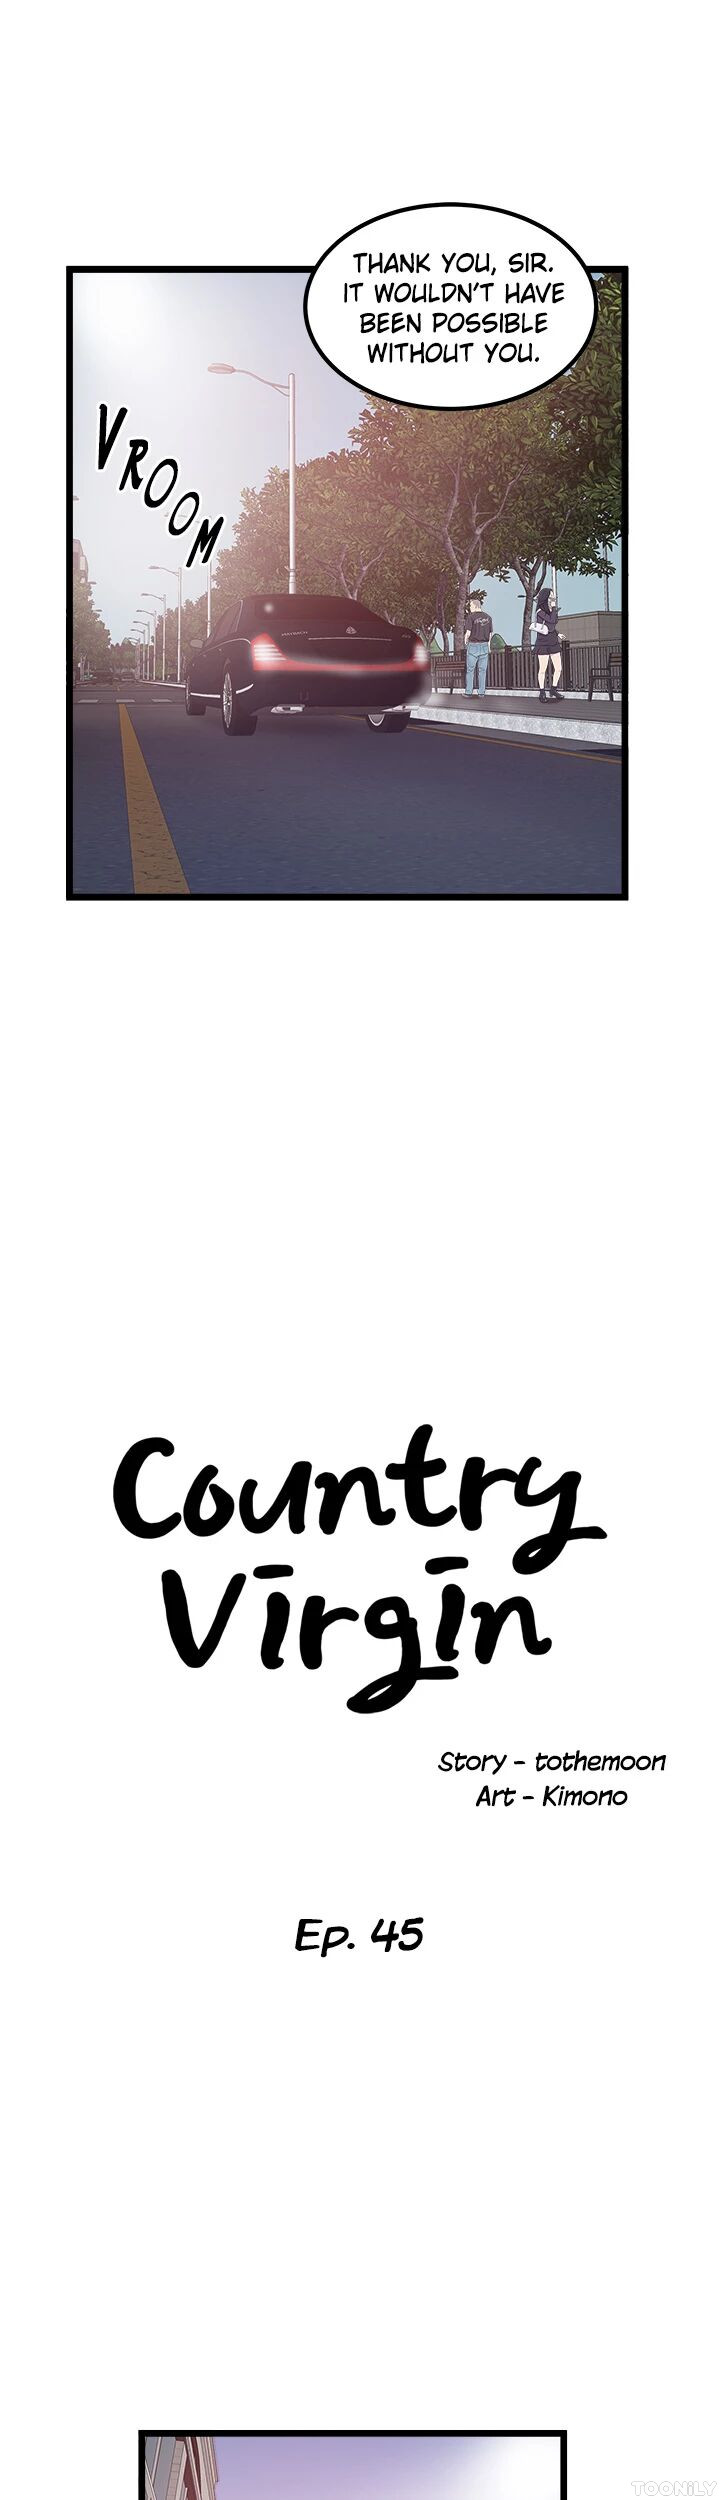 Country Virgin NEW image